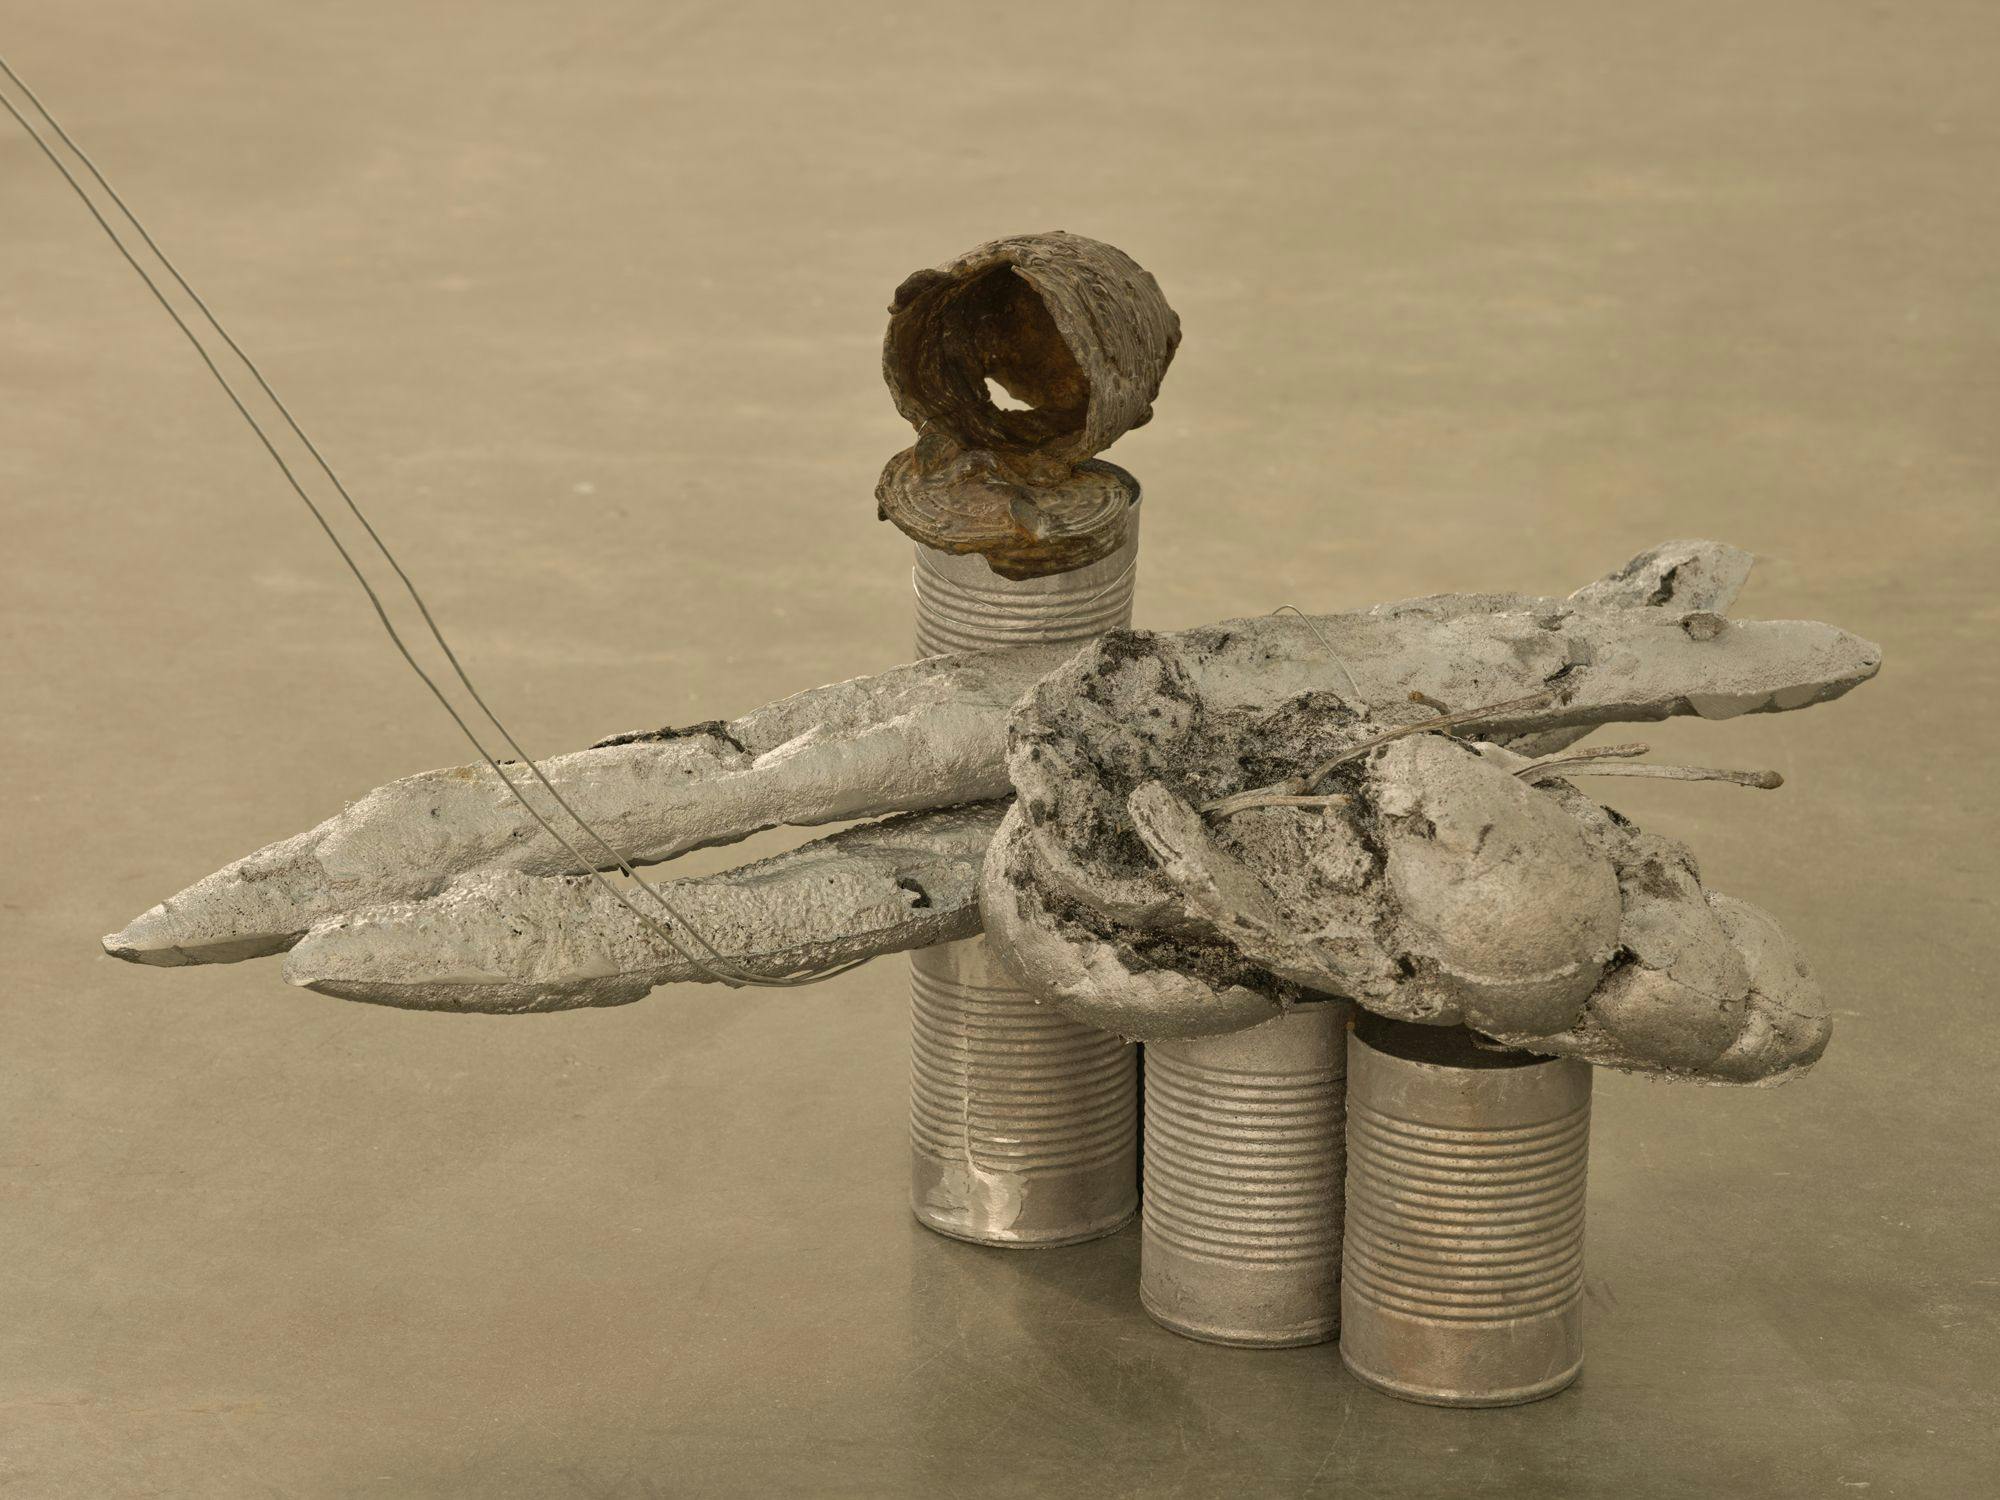 A detail of a sculpture comprised of silver-painted baguettes, wire, aluminum cans and a bronze can.